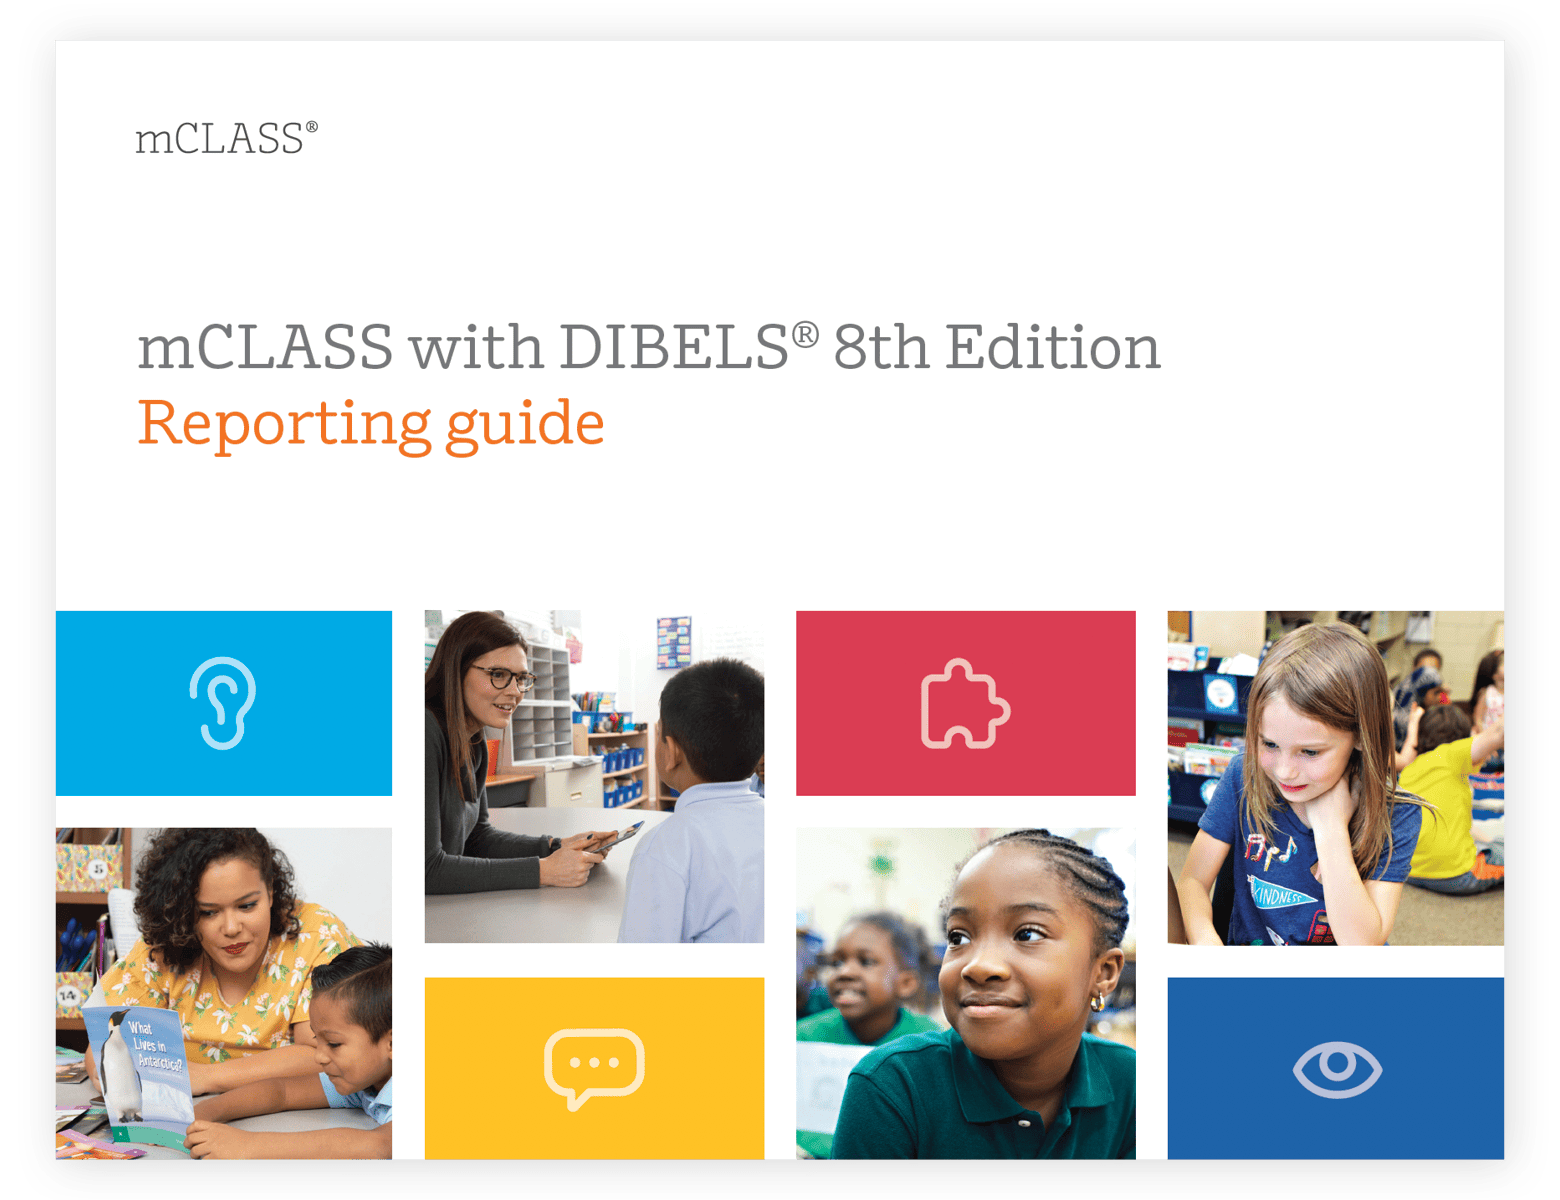 mCLASS with DIBELSs 8th Edition Reporting guide